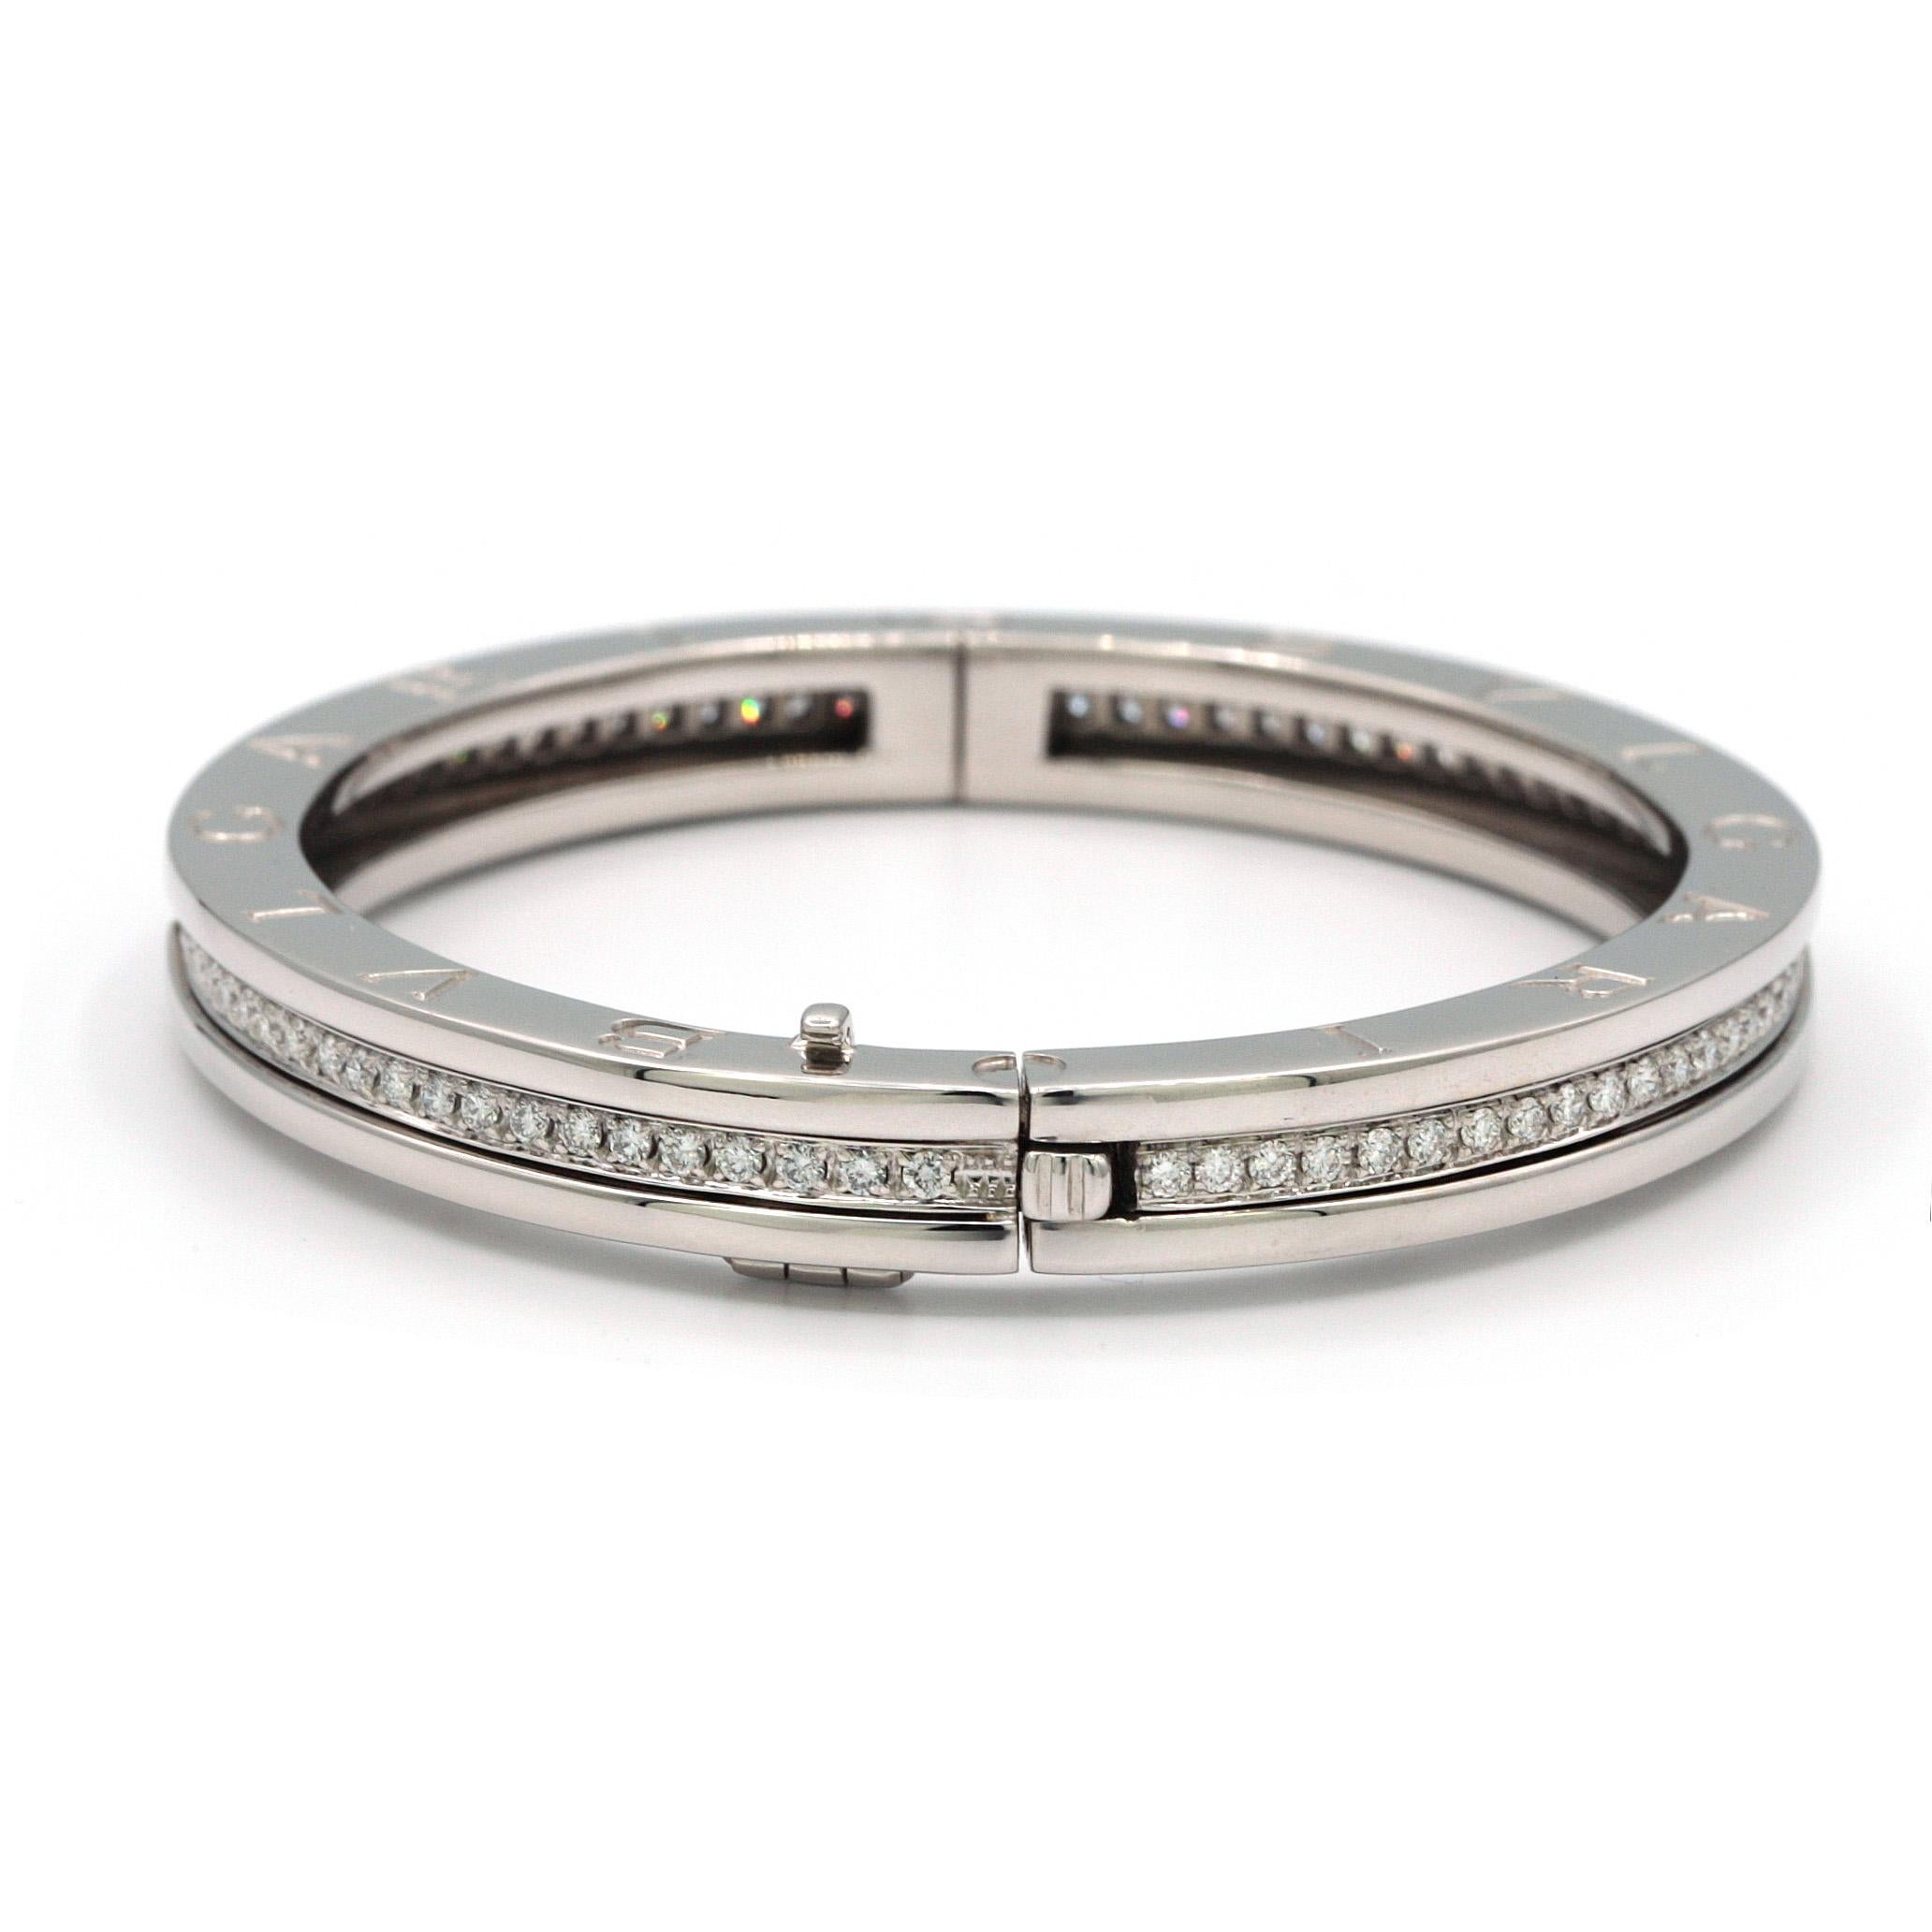 This 18K White Gold B.Zero 1 Diamond Bangle Bracelet by Bulgari is made with Round brilliant cut diamonds VVS1 clarity, E color total weight approx. 2.00ct

Weight: 50.1 grams
Length: 7